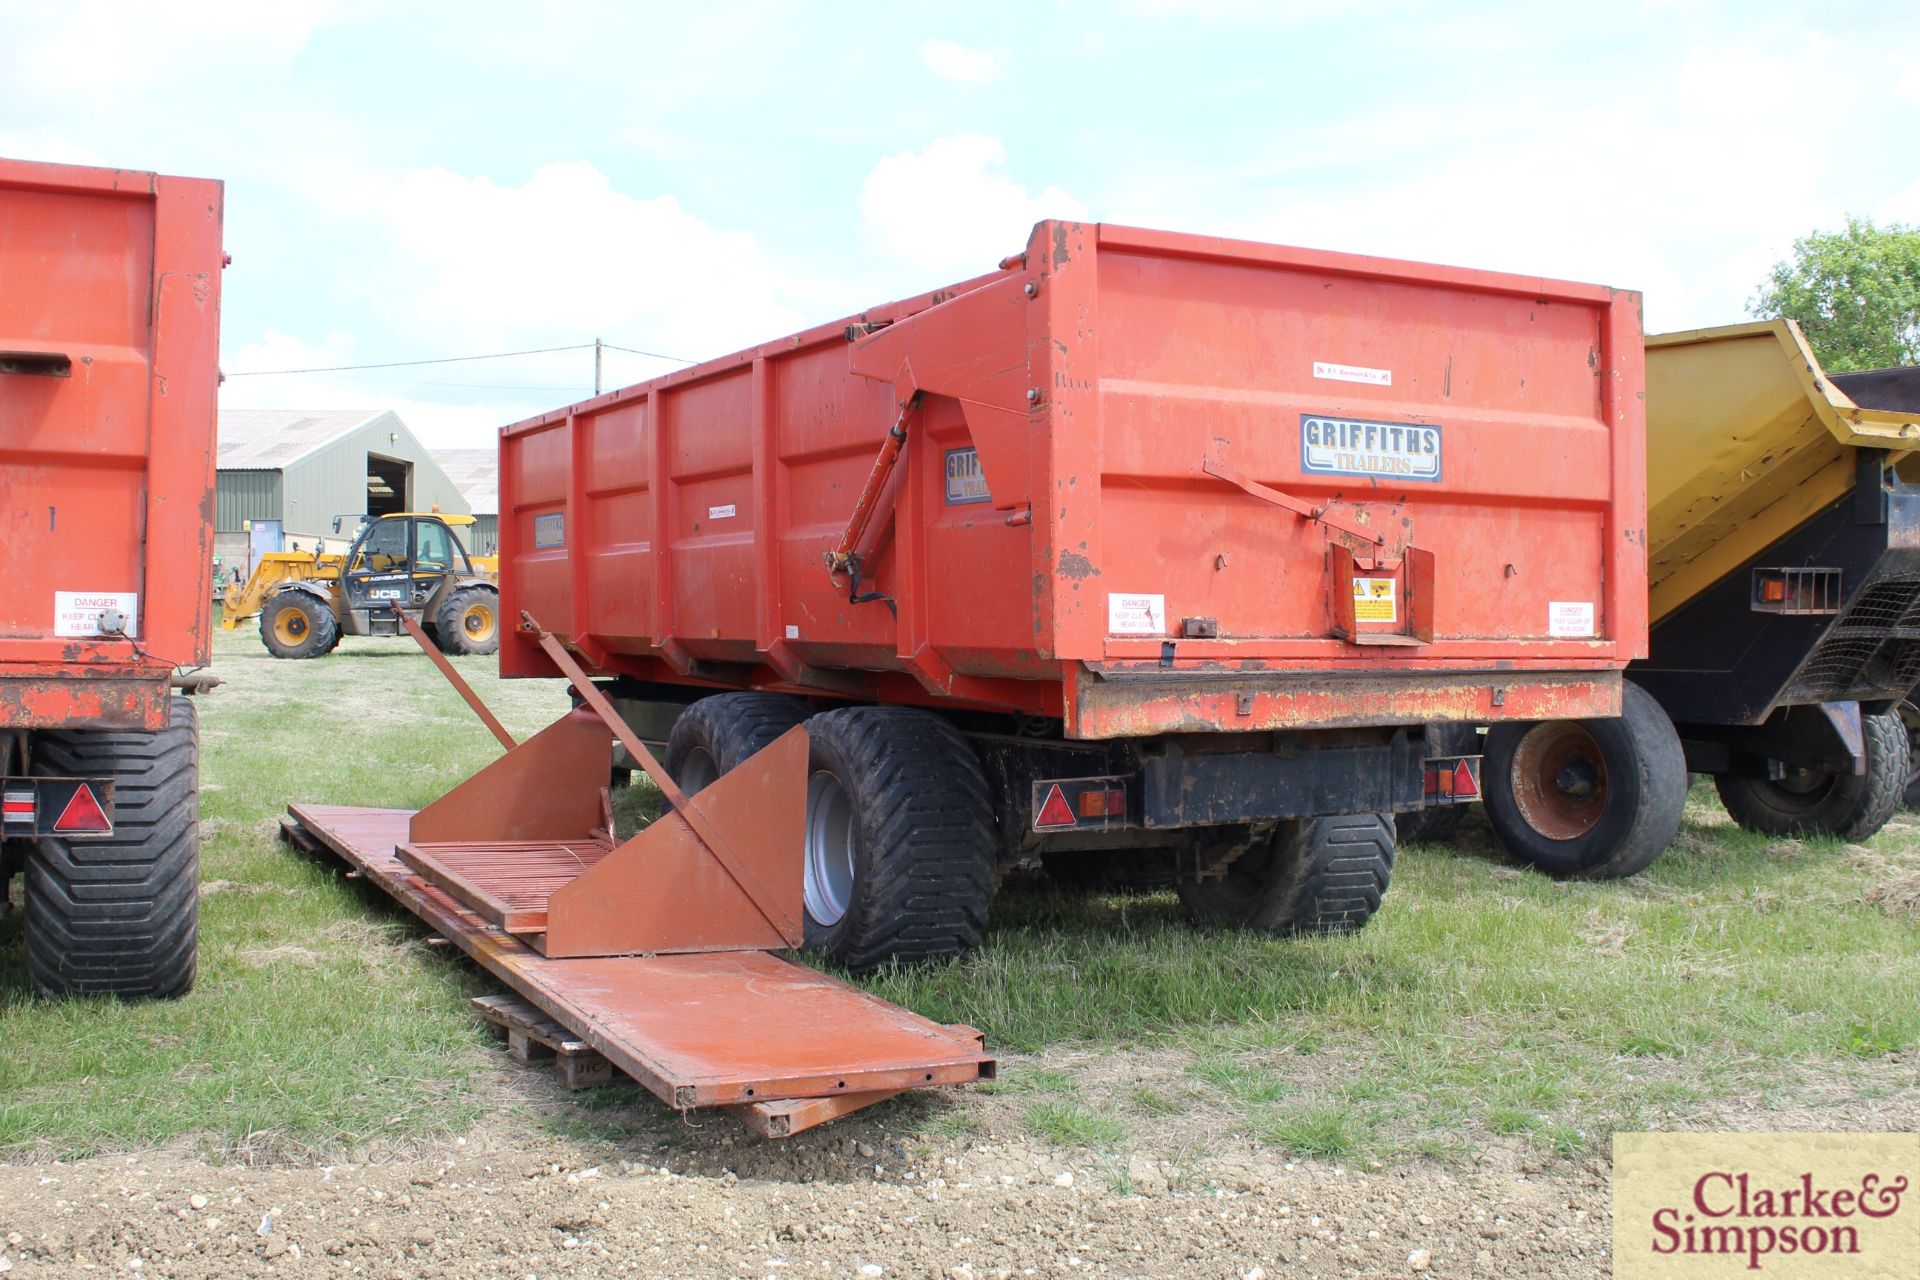 **CATALOGUE CHANGE** Griffiths/ Marston GHS140 14T twin axle tipping trailer. 01/1997. Serial number